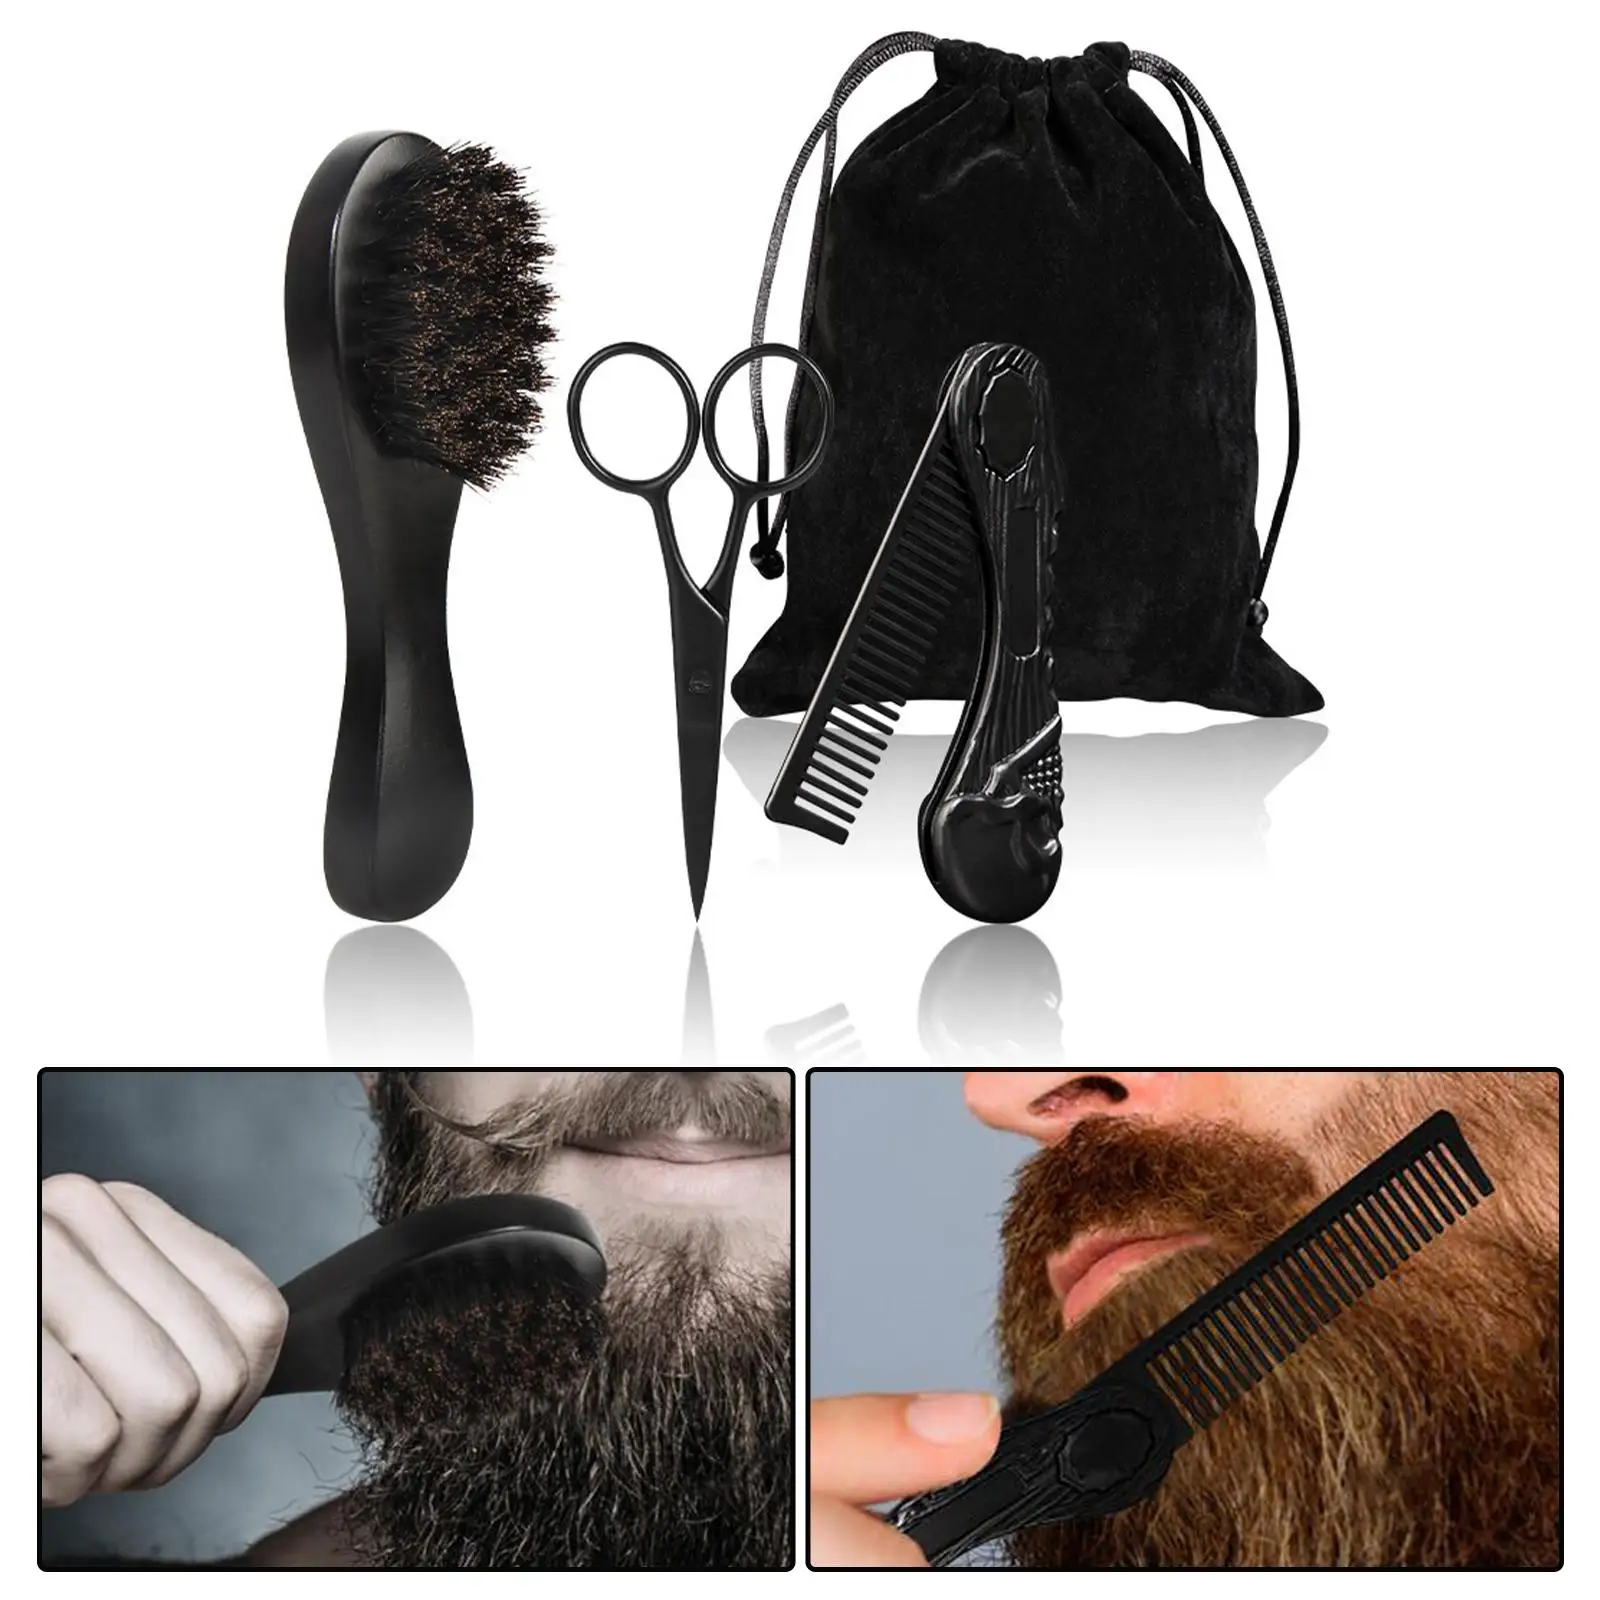 3x Professional Beard , Gift Wooden Pocket Comb Mustache Scissors with Dustproof Bag for Travel Men Cleaning Grooming Tool.